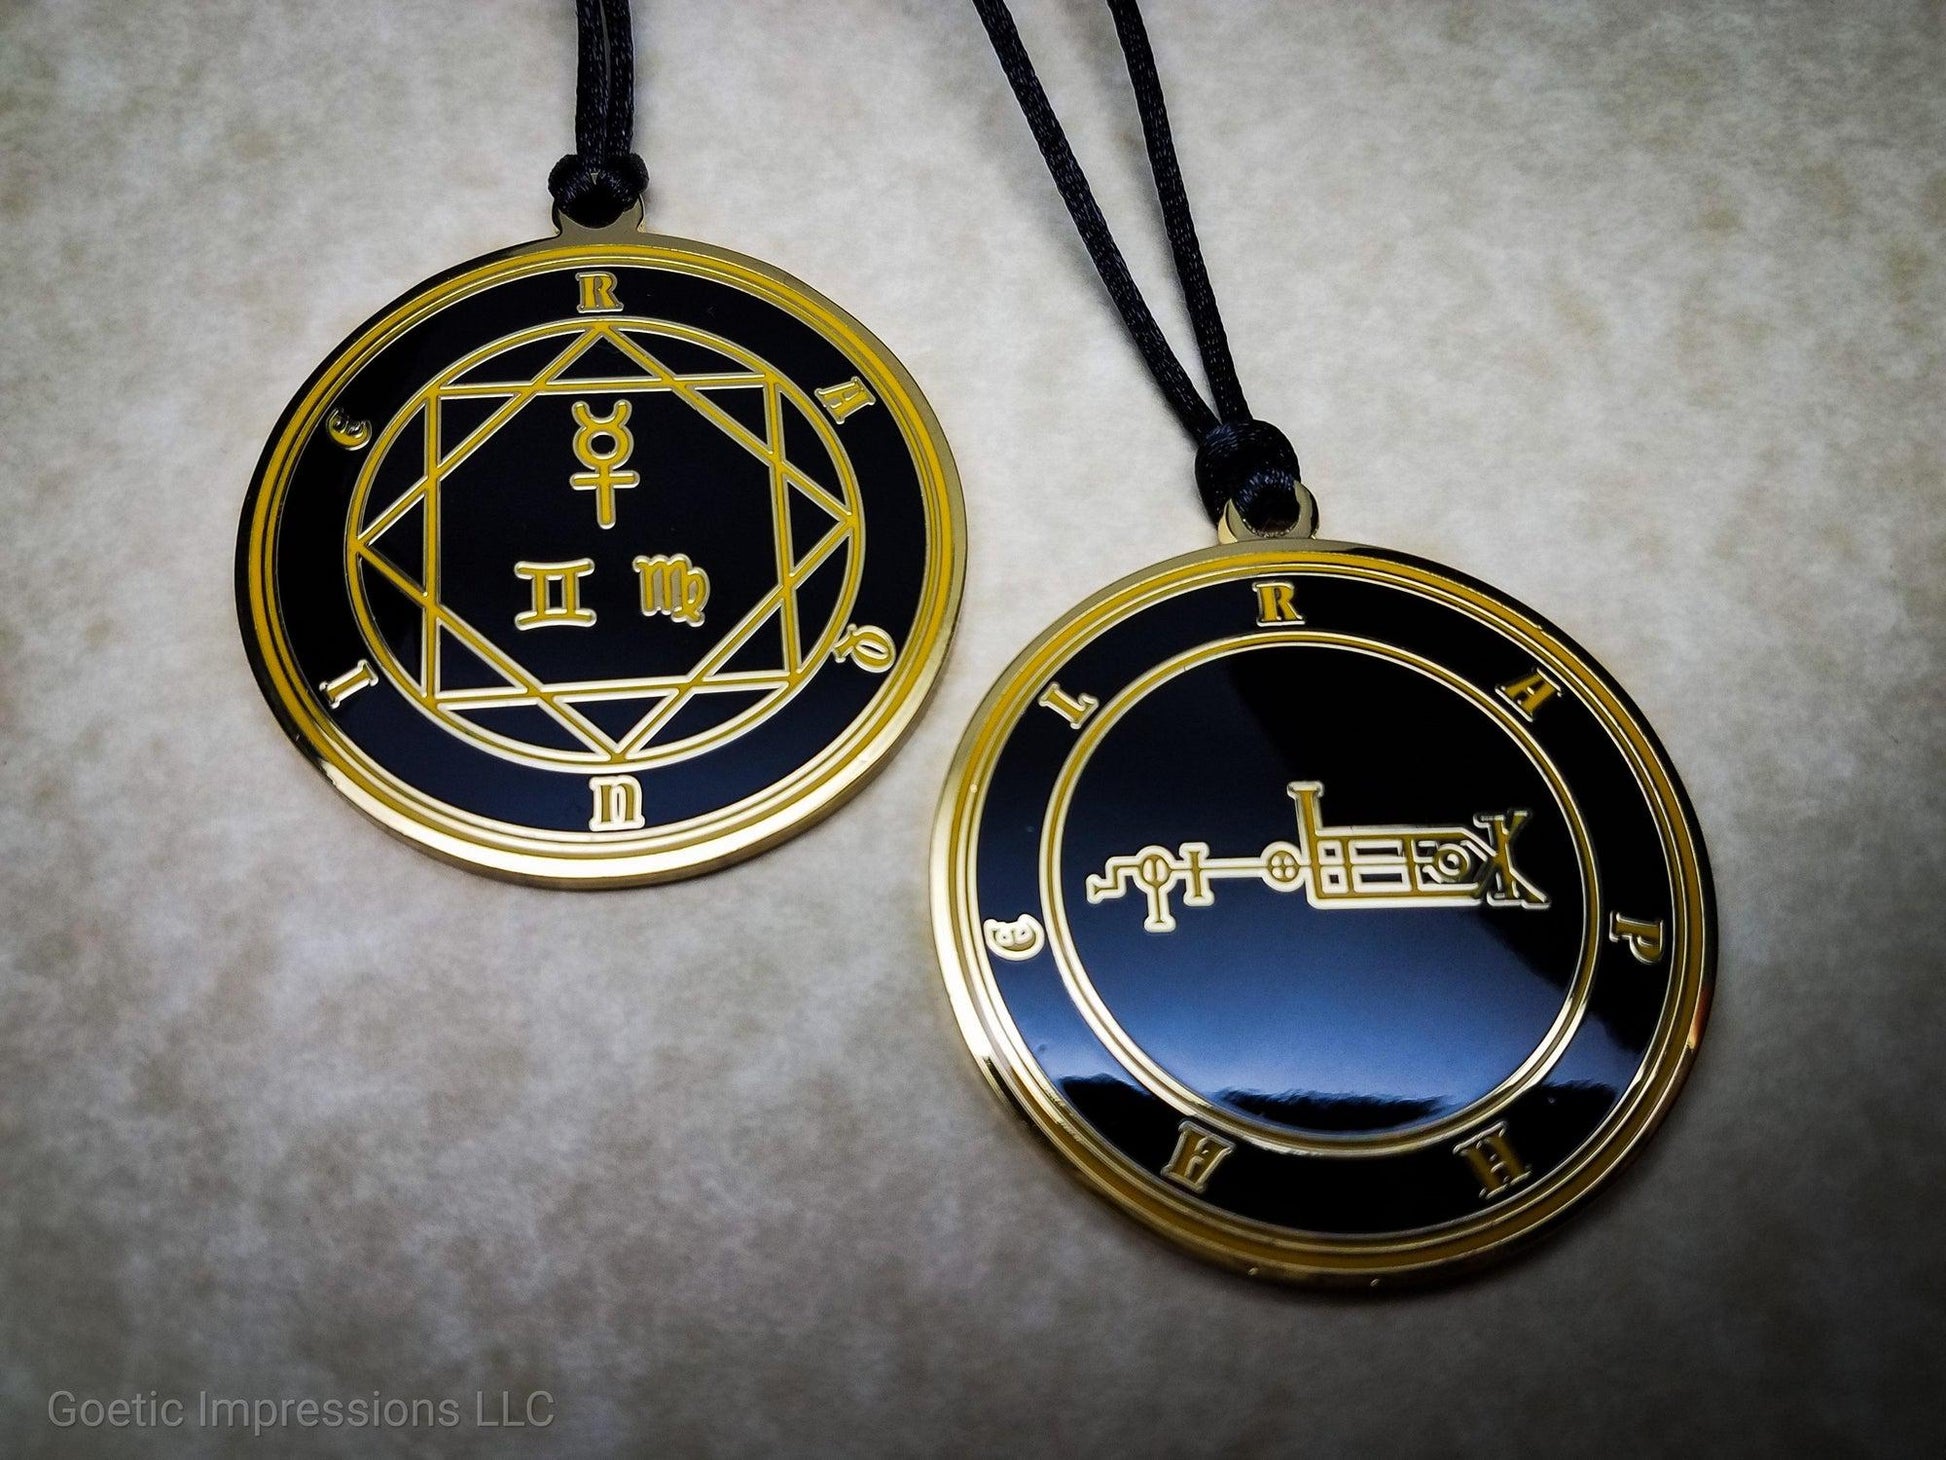 Heptameron Inspired Archangel Pendant featuring the seal and sigils of Archangel Raphael.  Featuring on the reverse side of the talsiman, the Heaven Raquie and astrological symbols of Mercury, Gemini and Virgo based on Cornelius Agrippa